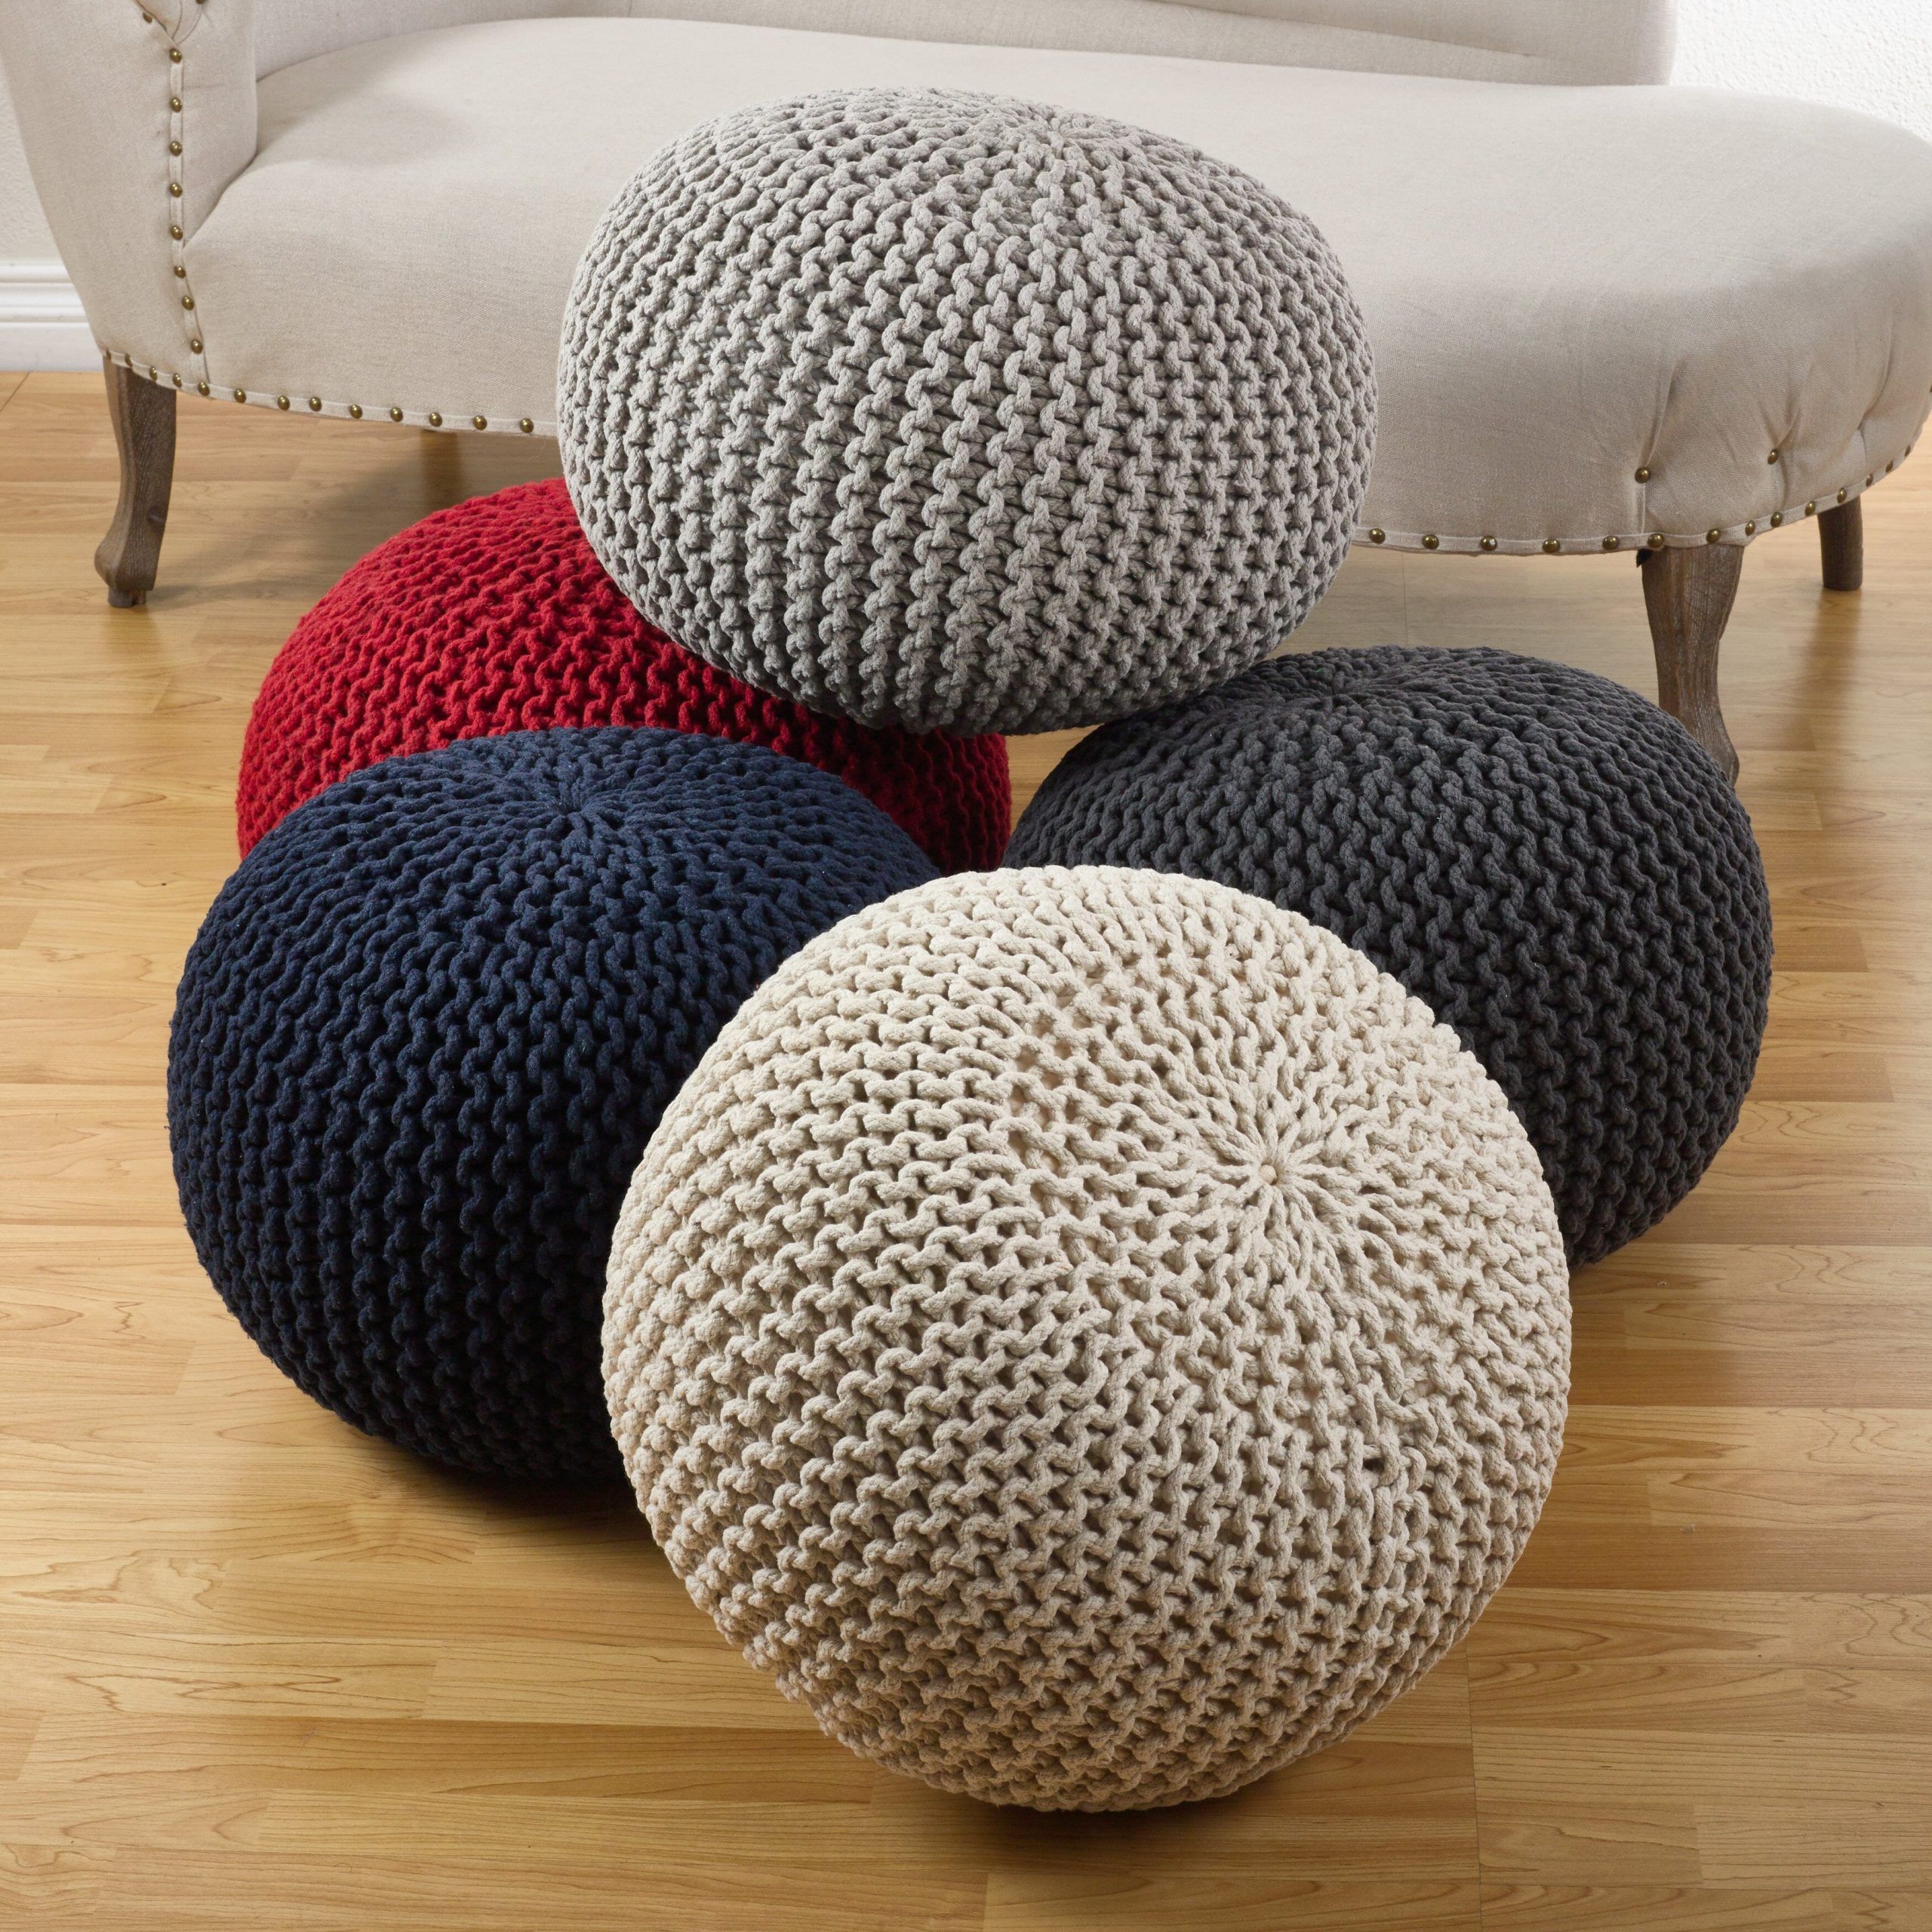 Saro Cotton Twisted Rope Pouf Ottoman & Reviews | Wayfair Inside Black And Natural Cotton Pouf Ottomans (View 2 of 20)